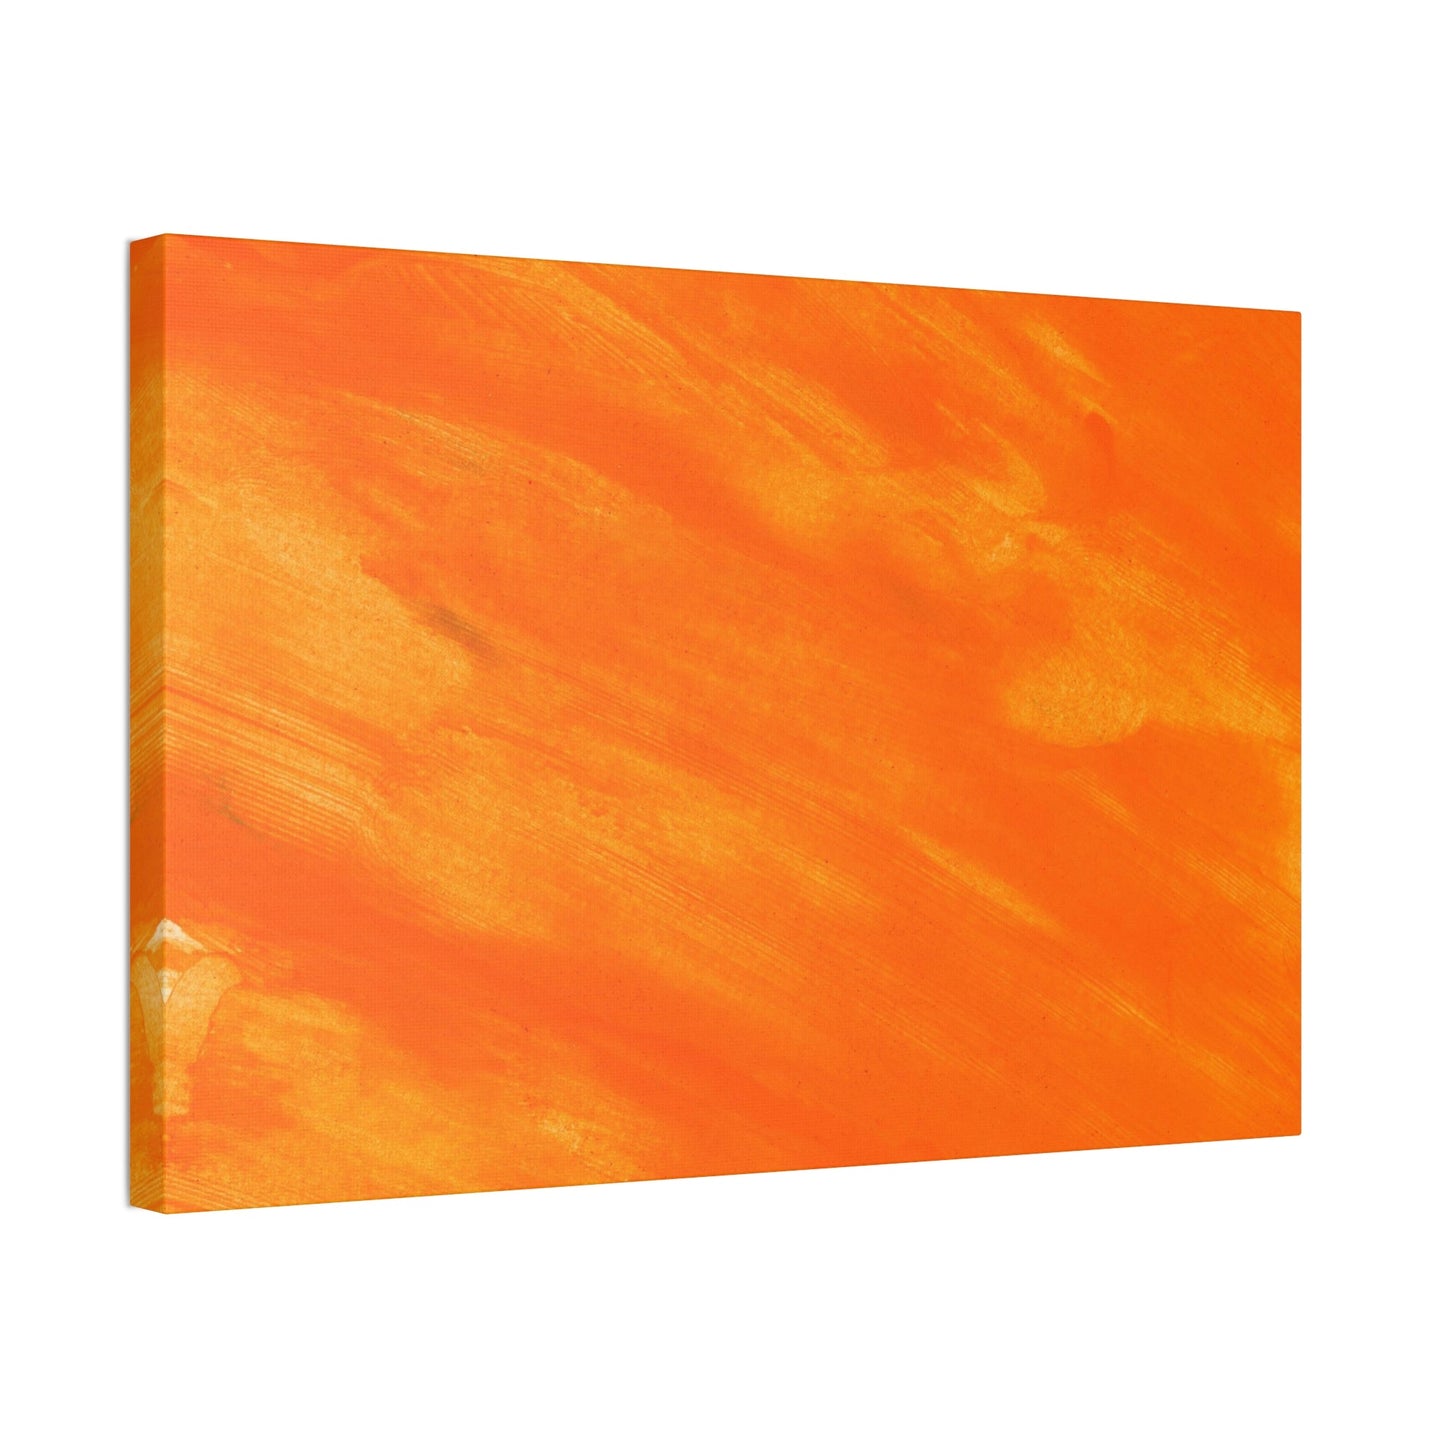 Tangy Tones: Orange Wall Art on Vibrant Framed Poster & Canvas